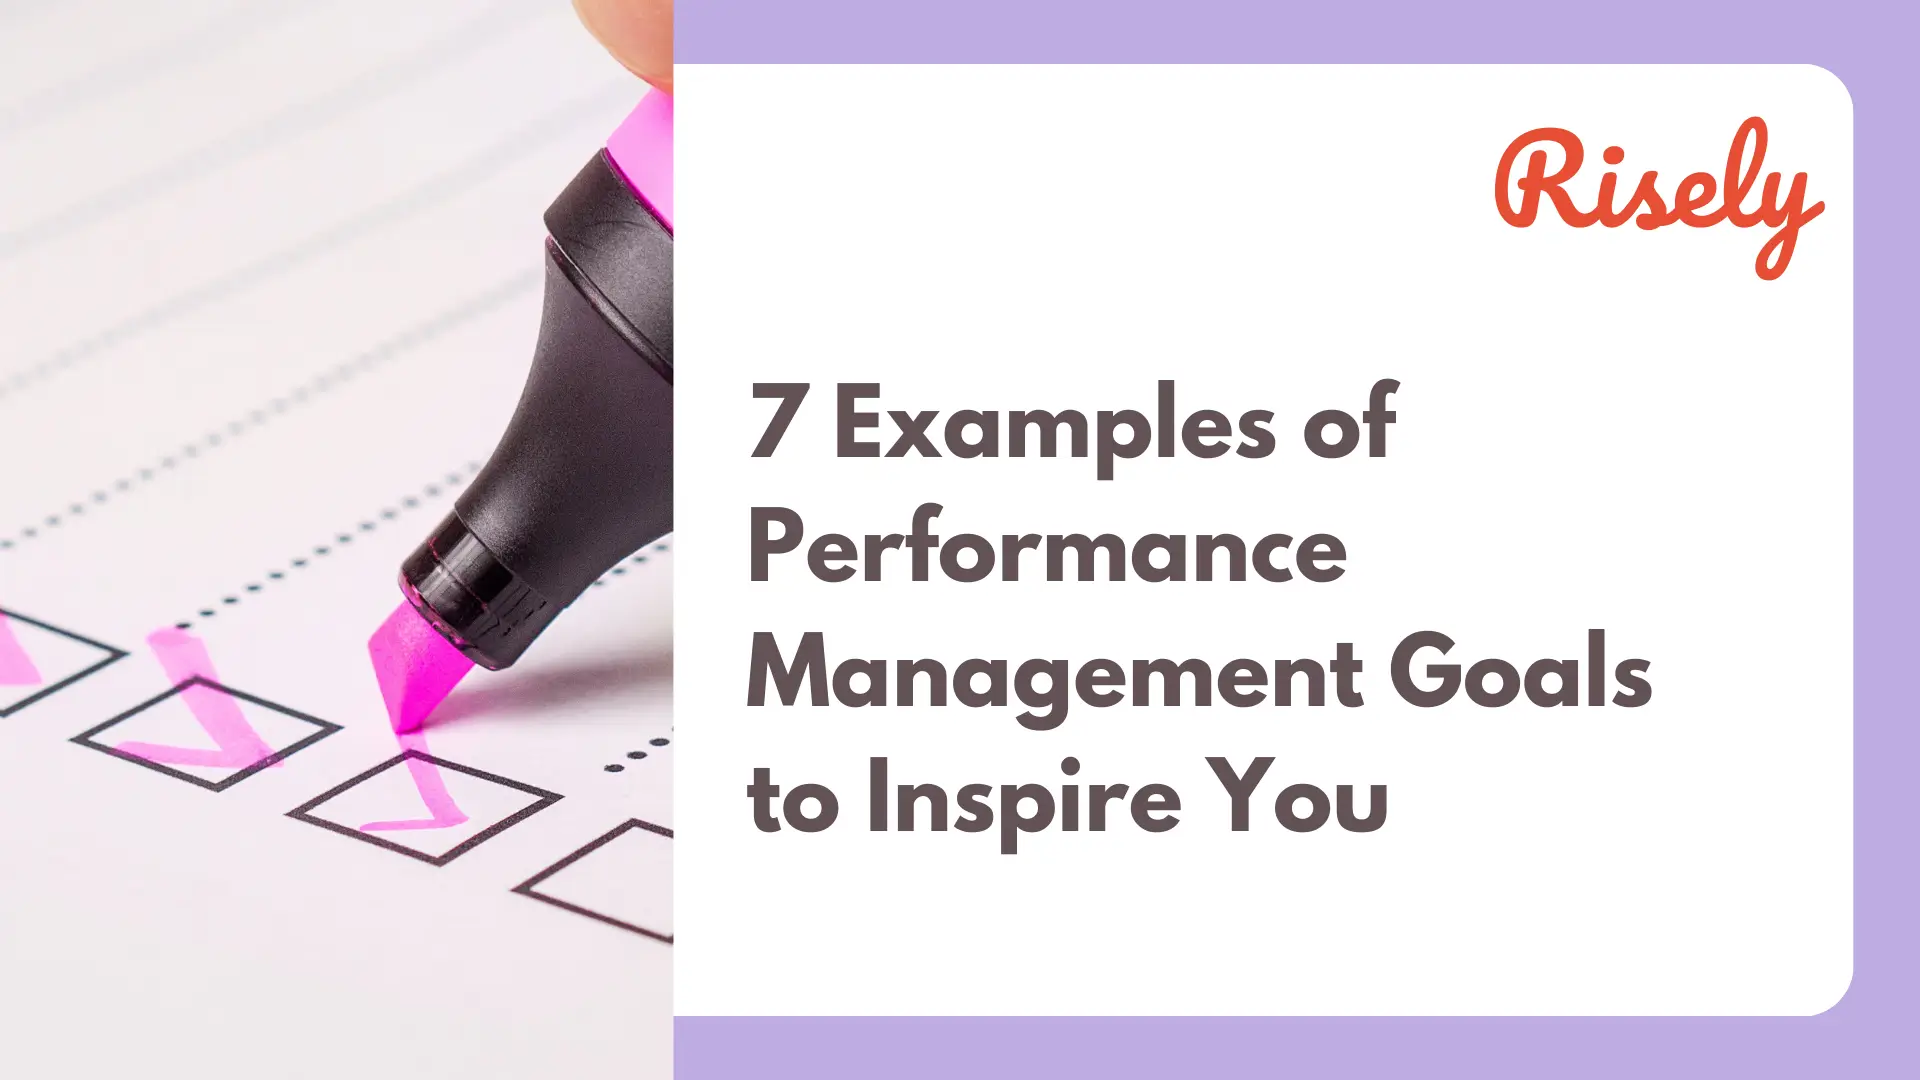 7 Examples of Performance Management Goals to Inspire You